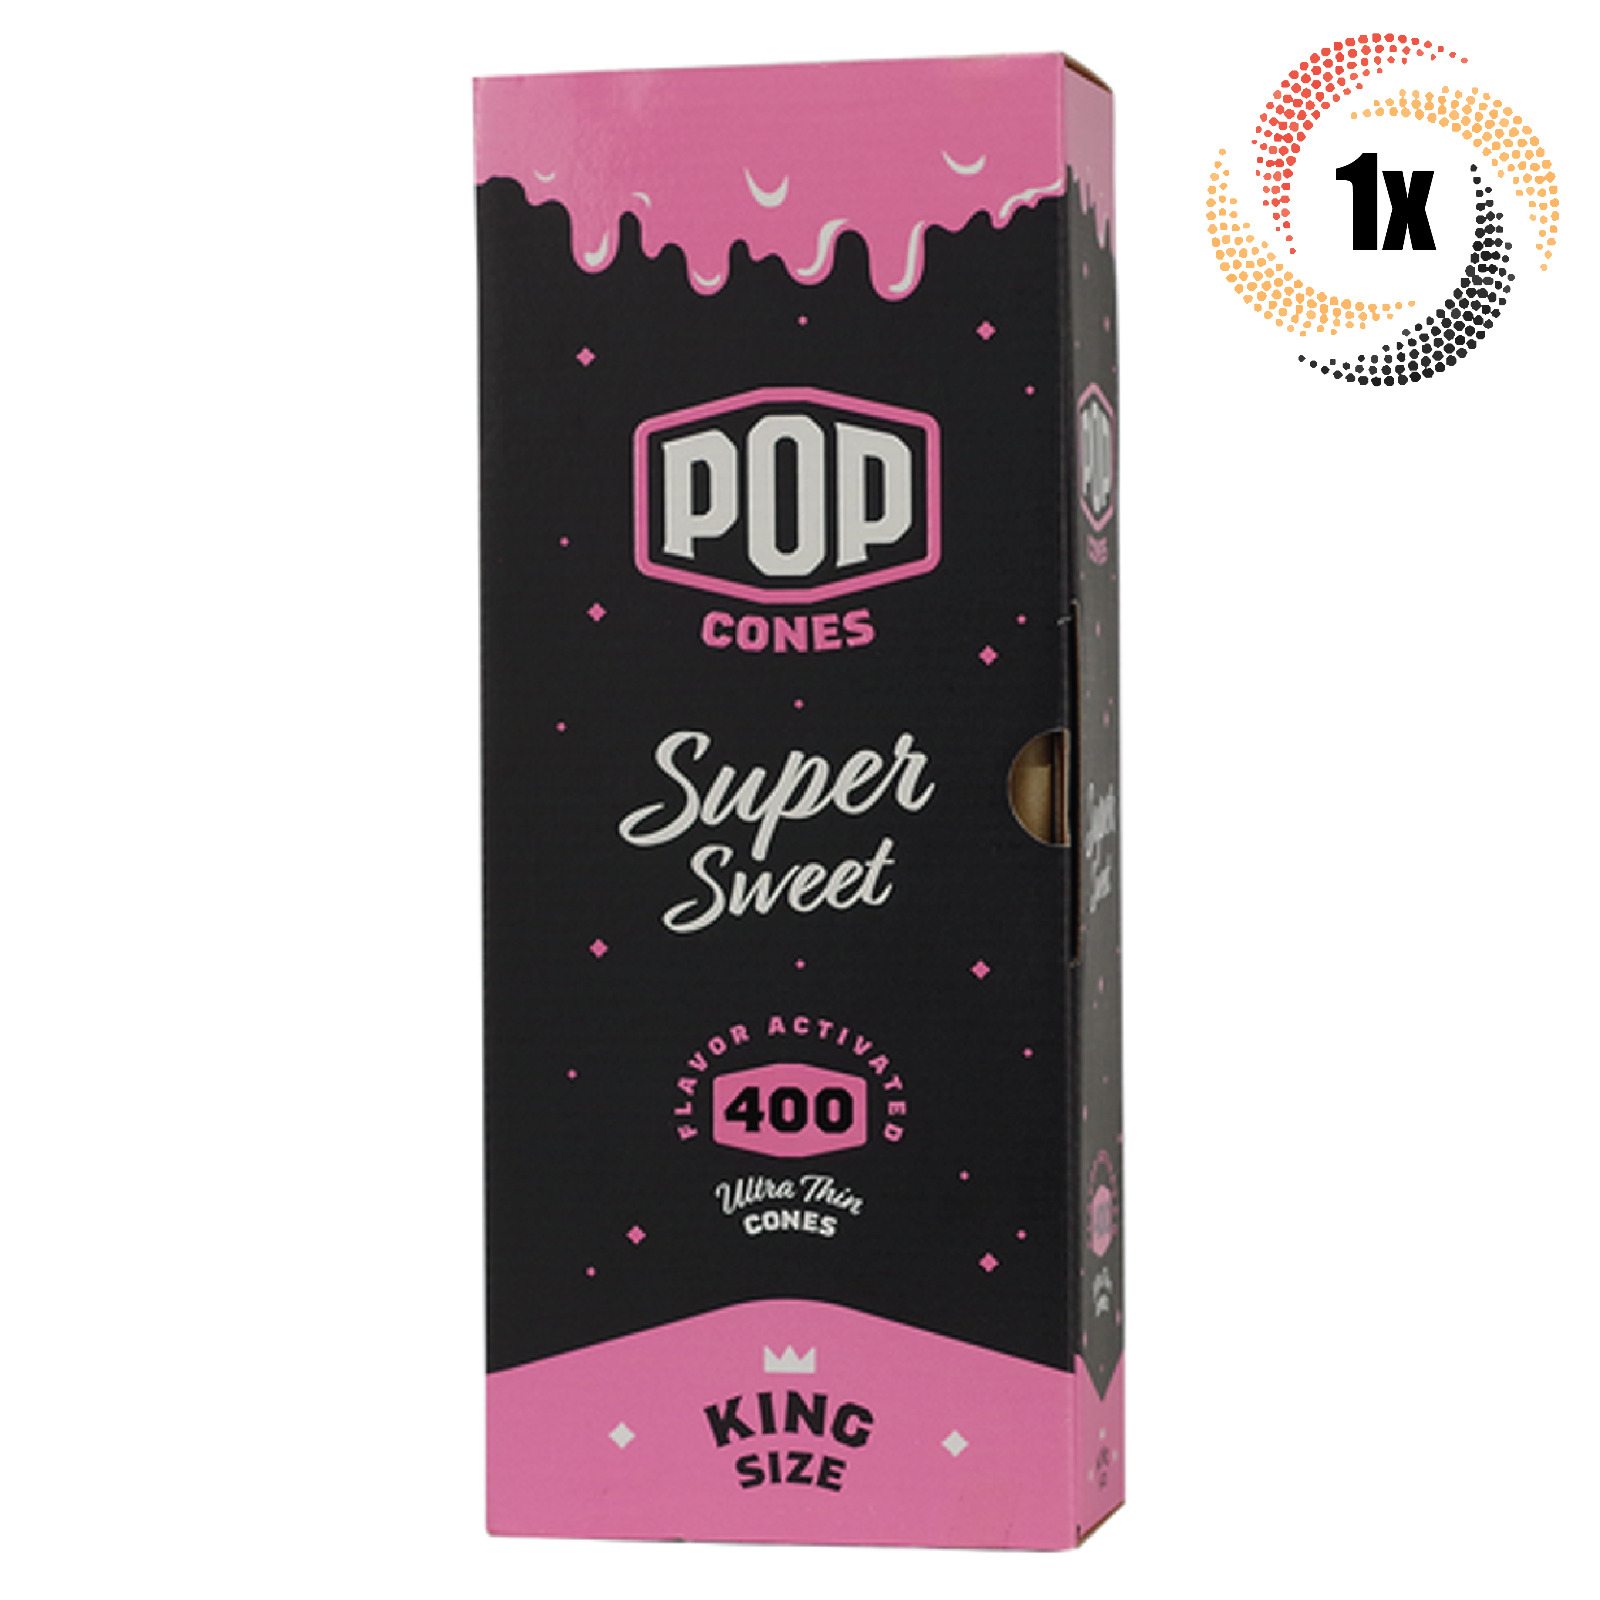 1x Box Pop Super Sweet Cones | 400 Cones Each | King Size | + 2 Free Tubes